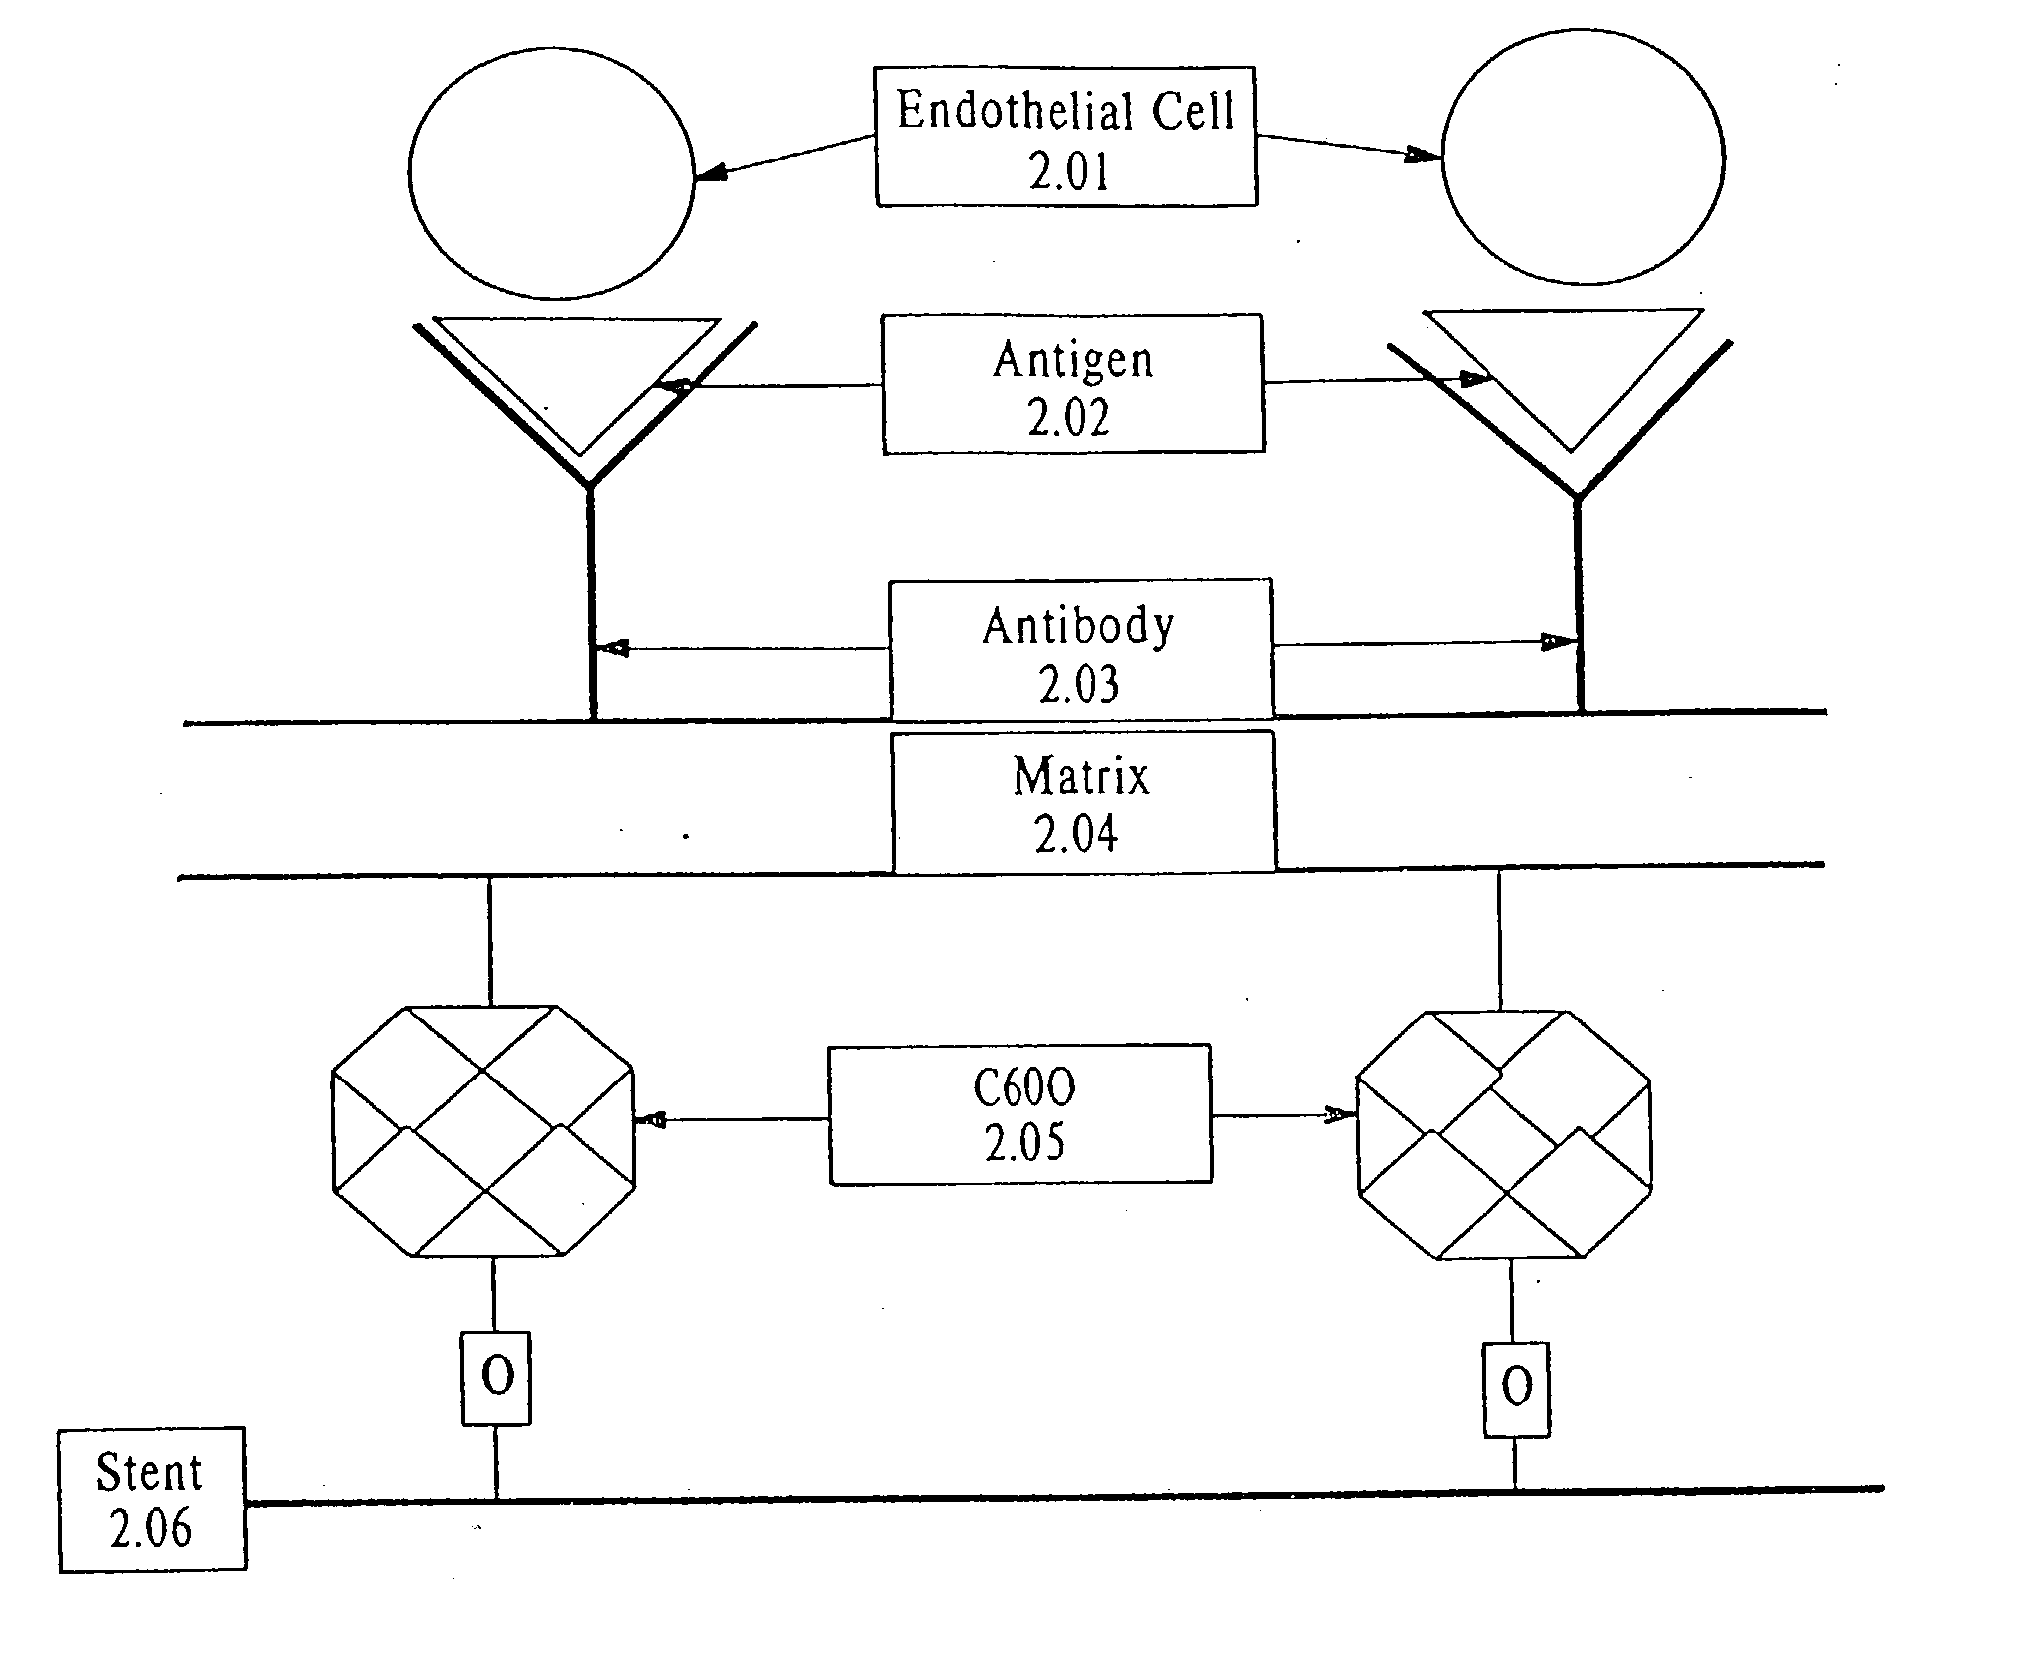 Medical device with coating that promotes cell adherence and differentiation